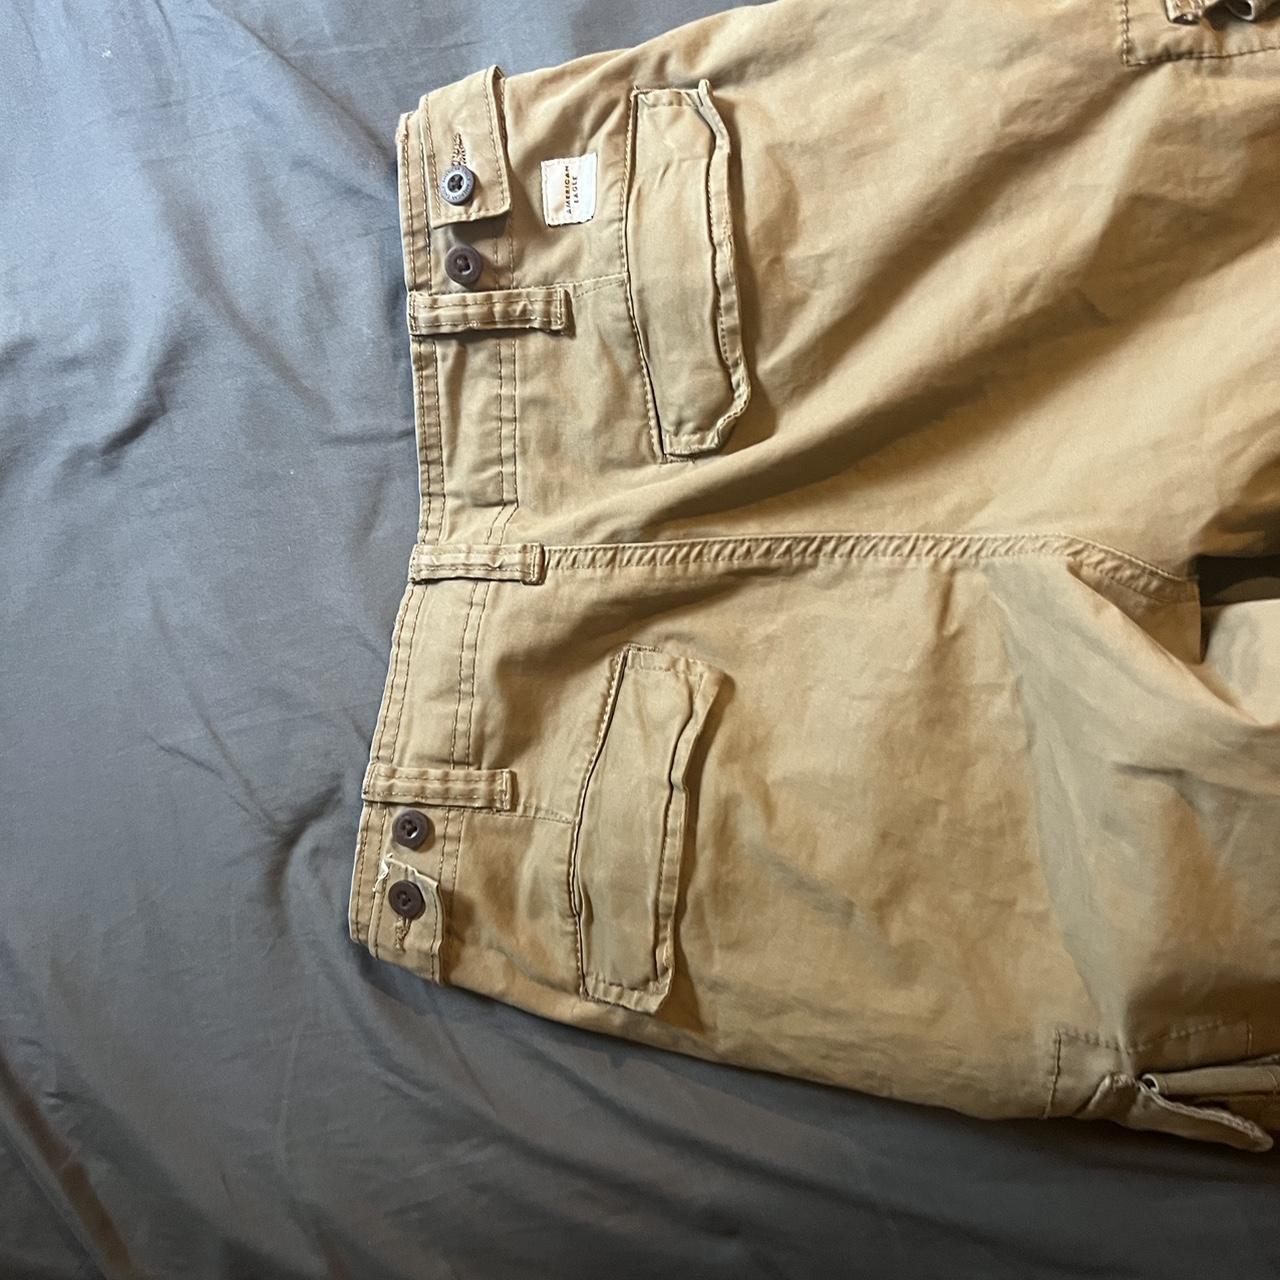 AMERICAN EAGLE CARGO PANTS Size 28 I’m very tall... - Depop